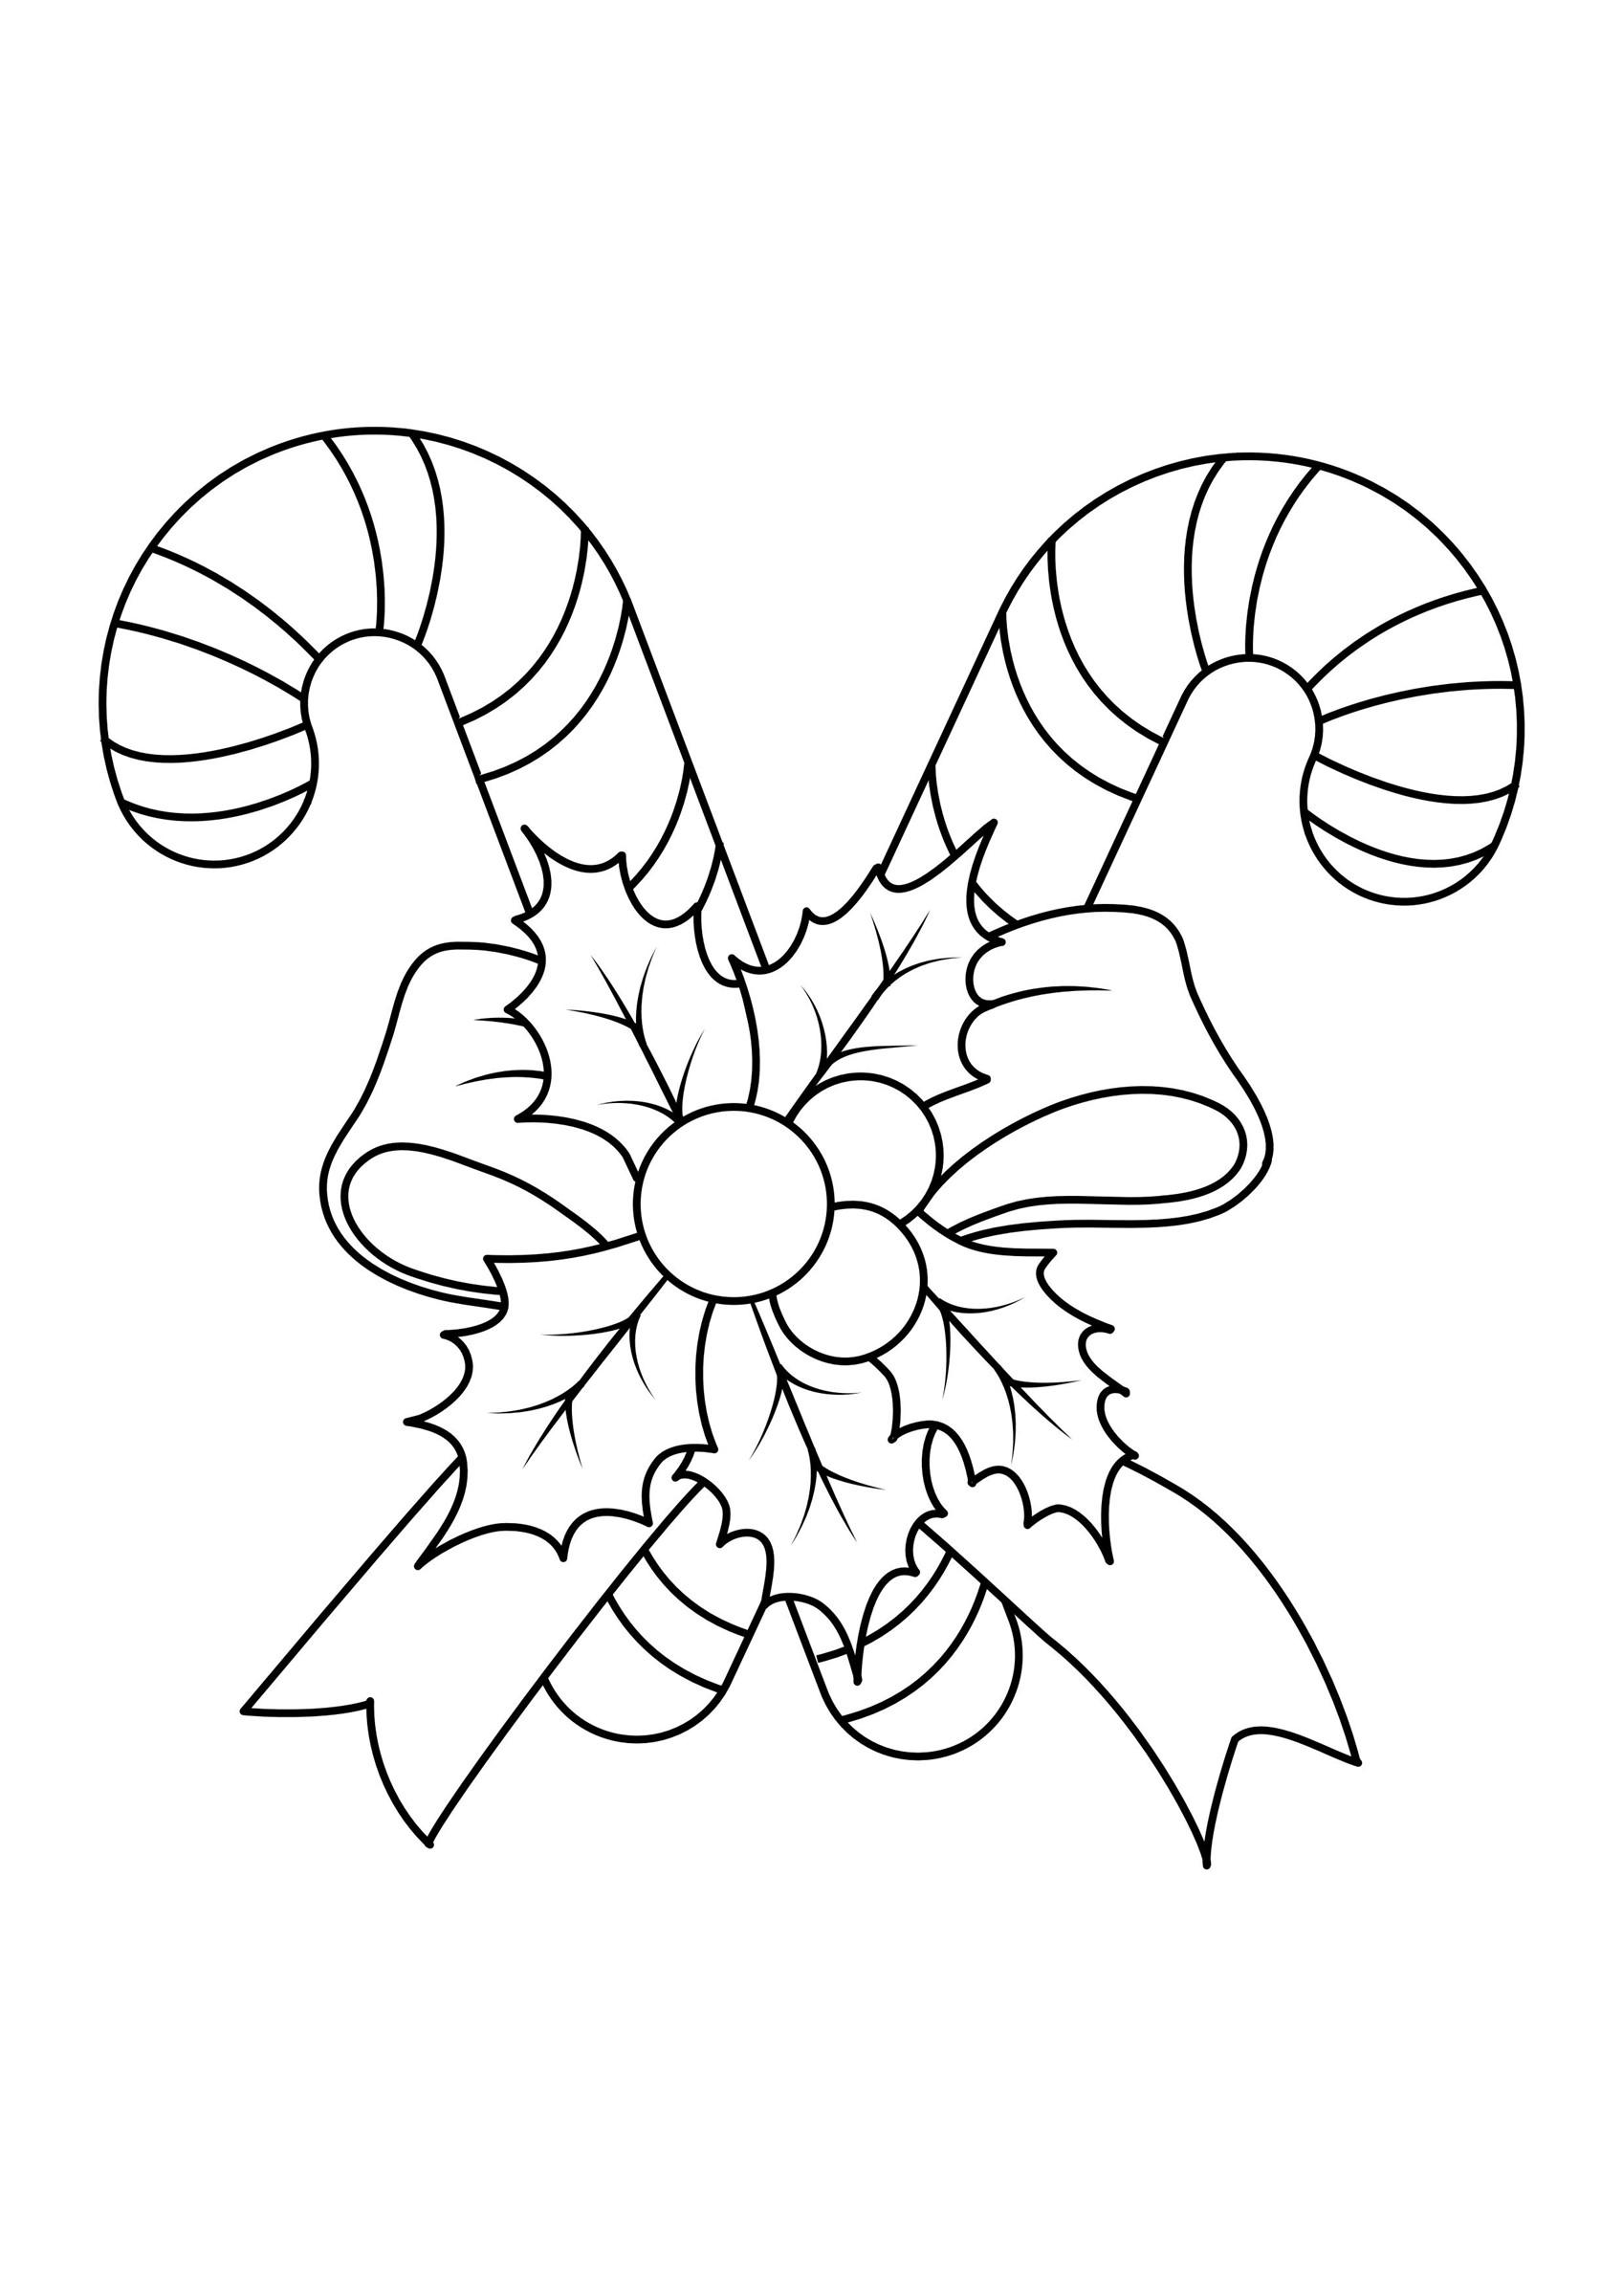 Christmas Ornaments Coloring Pages - GetColoringPages.com